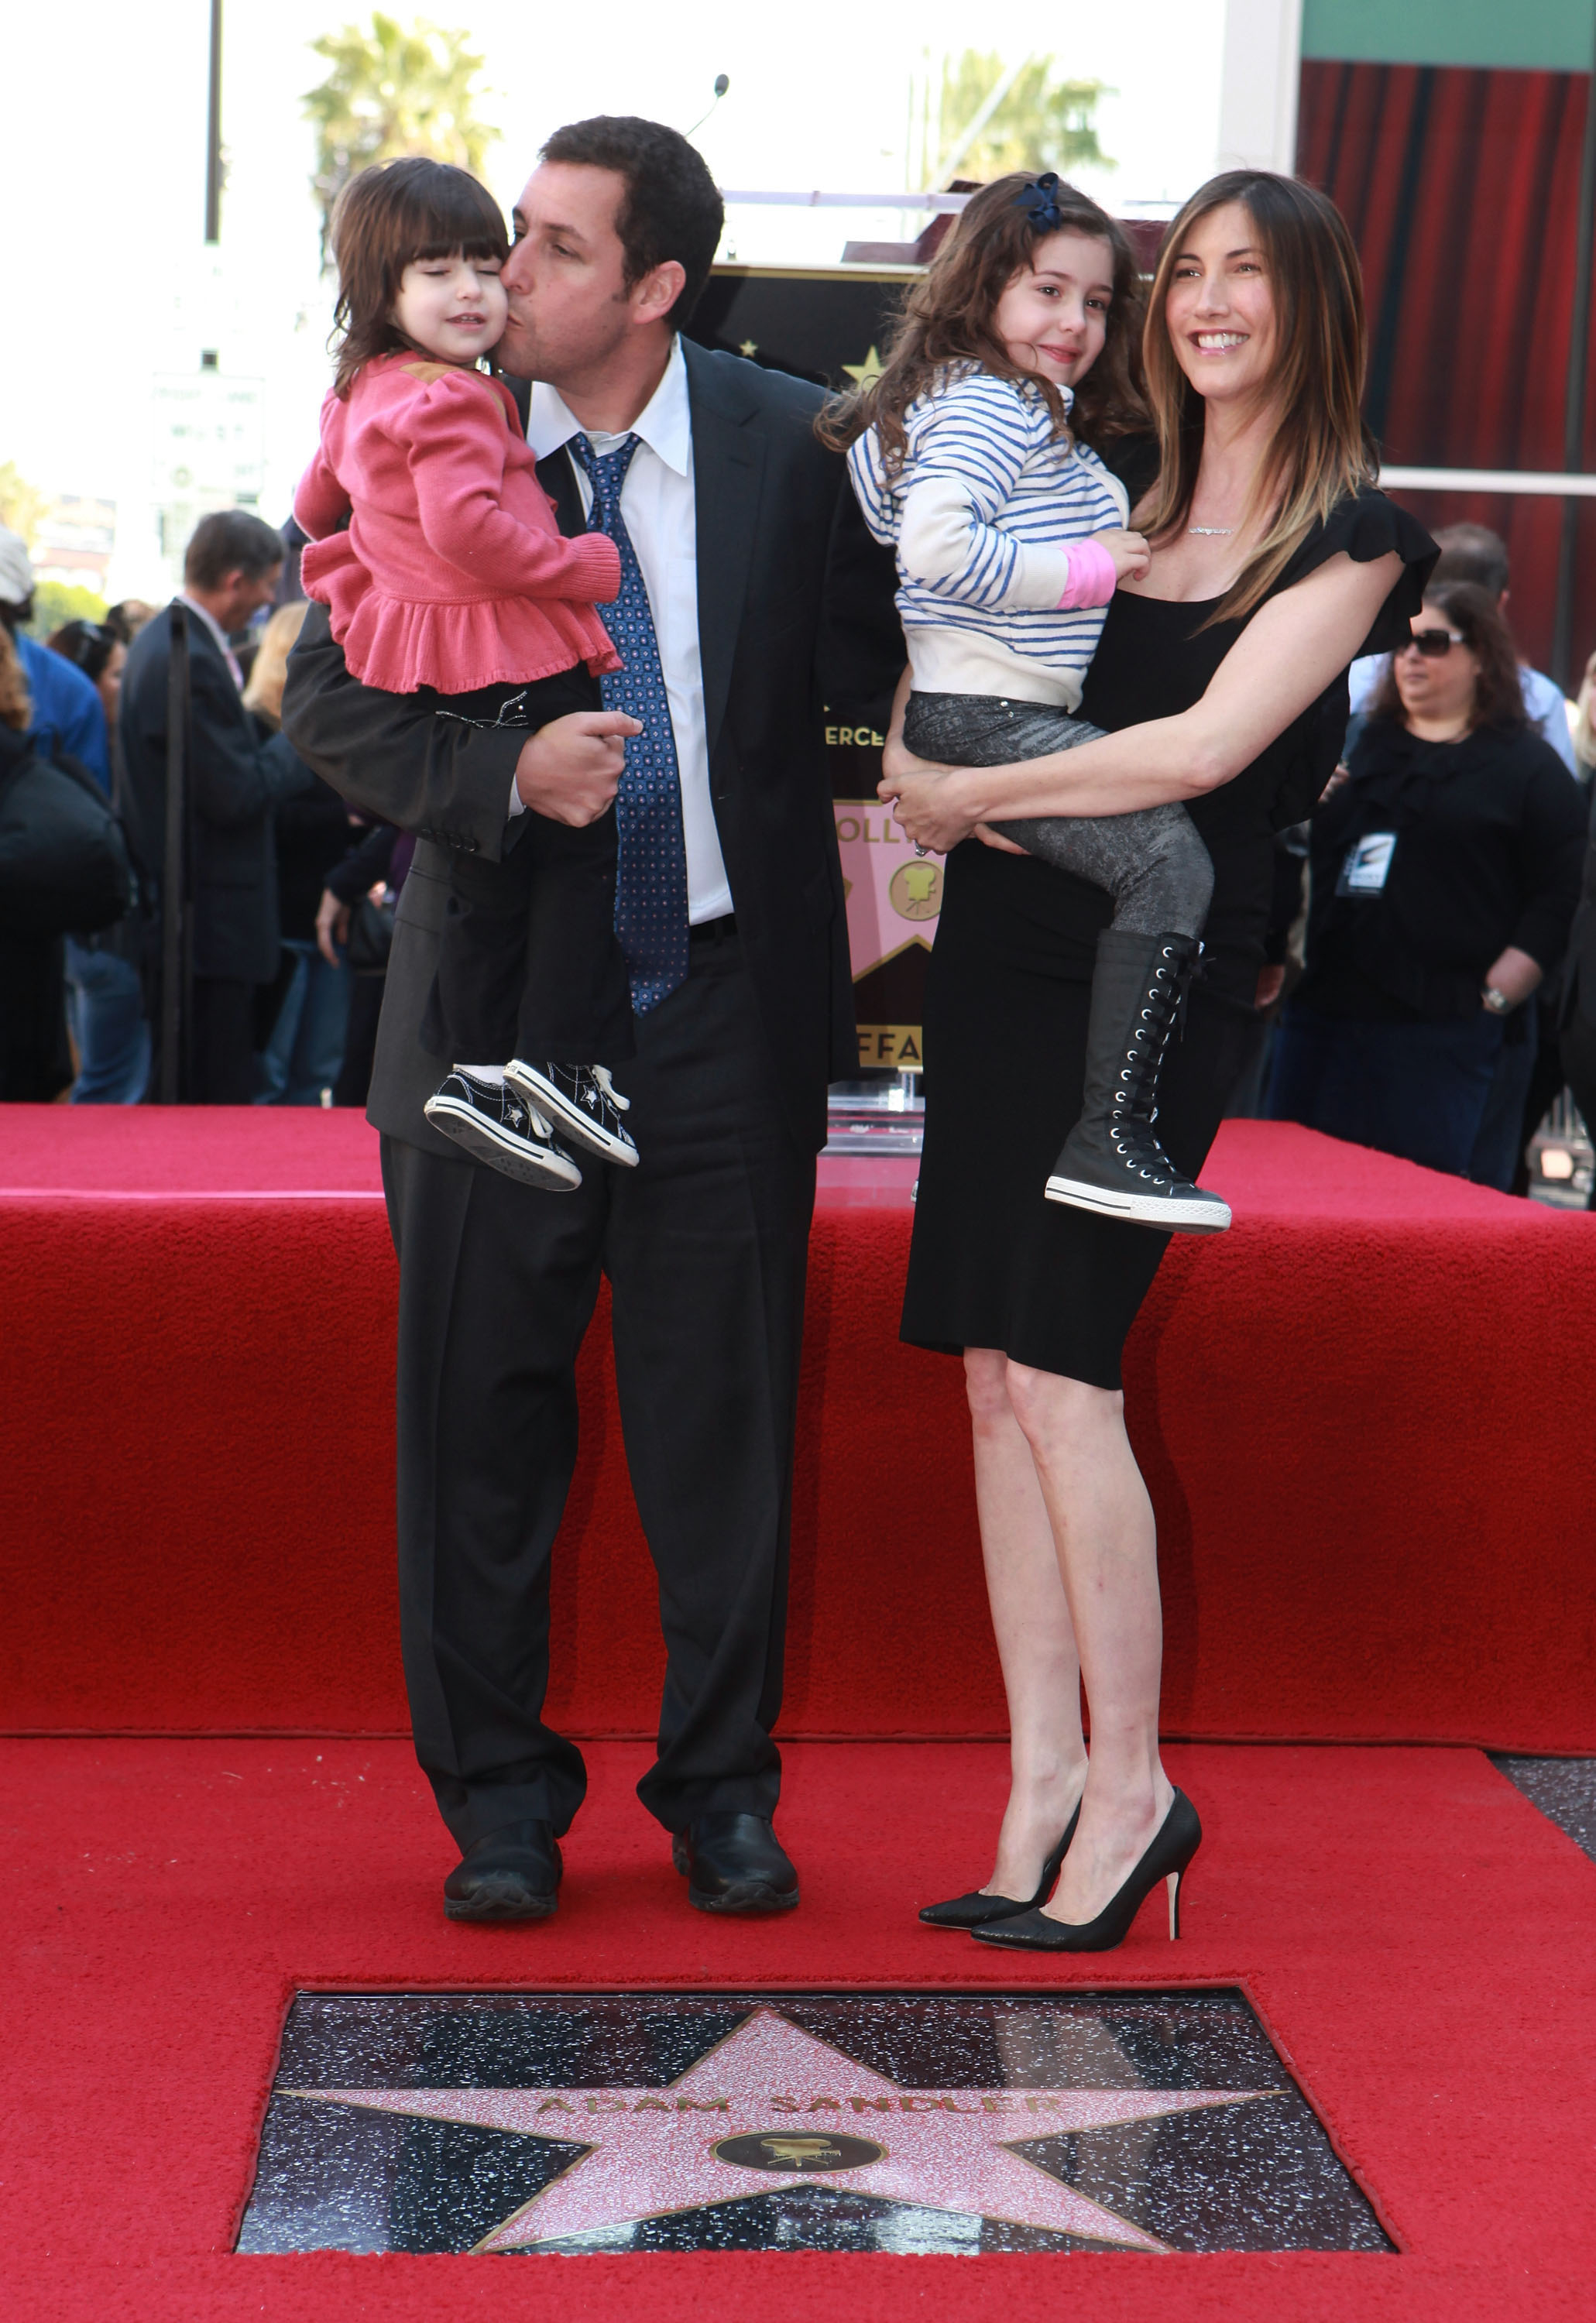 Adam and Jackie Sandler with their daughters, Sadie and Sunny